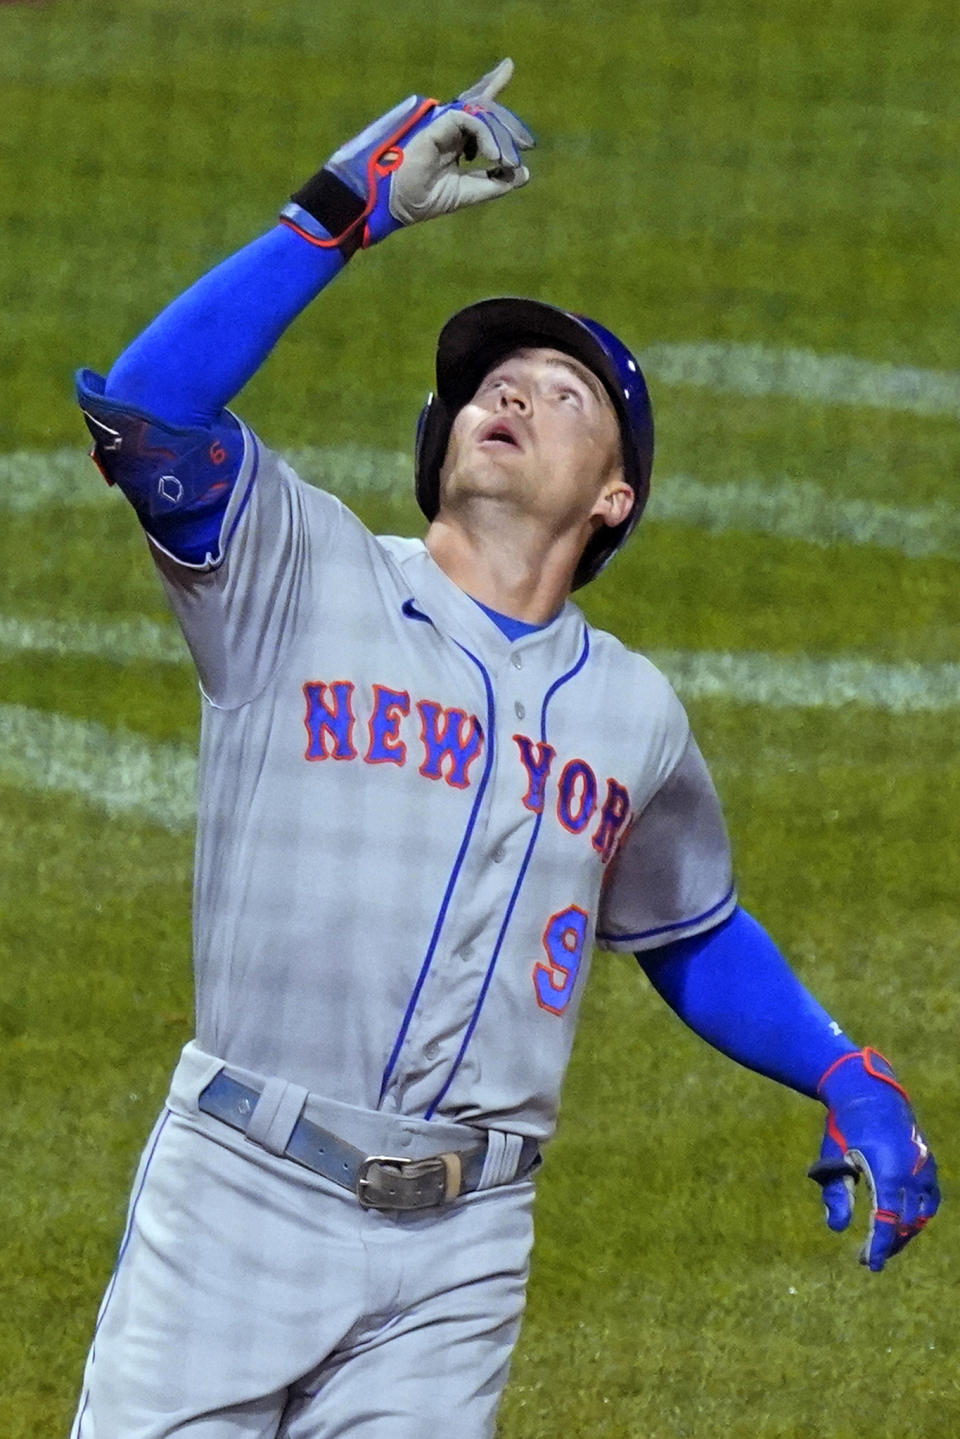 New York Mets' Brandon Nimmo crosses home plate after hitting a two-run home run off Pittsburgh Pirates relief pitcher Robert Stephenson during the seventh inning of a baseball game in Pittsburgh, Tuesday, Sept. 6, 2022. (AP Photo/Gene J. Puskar)